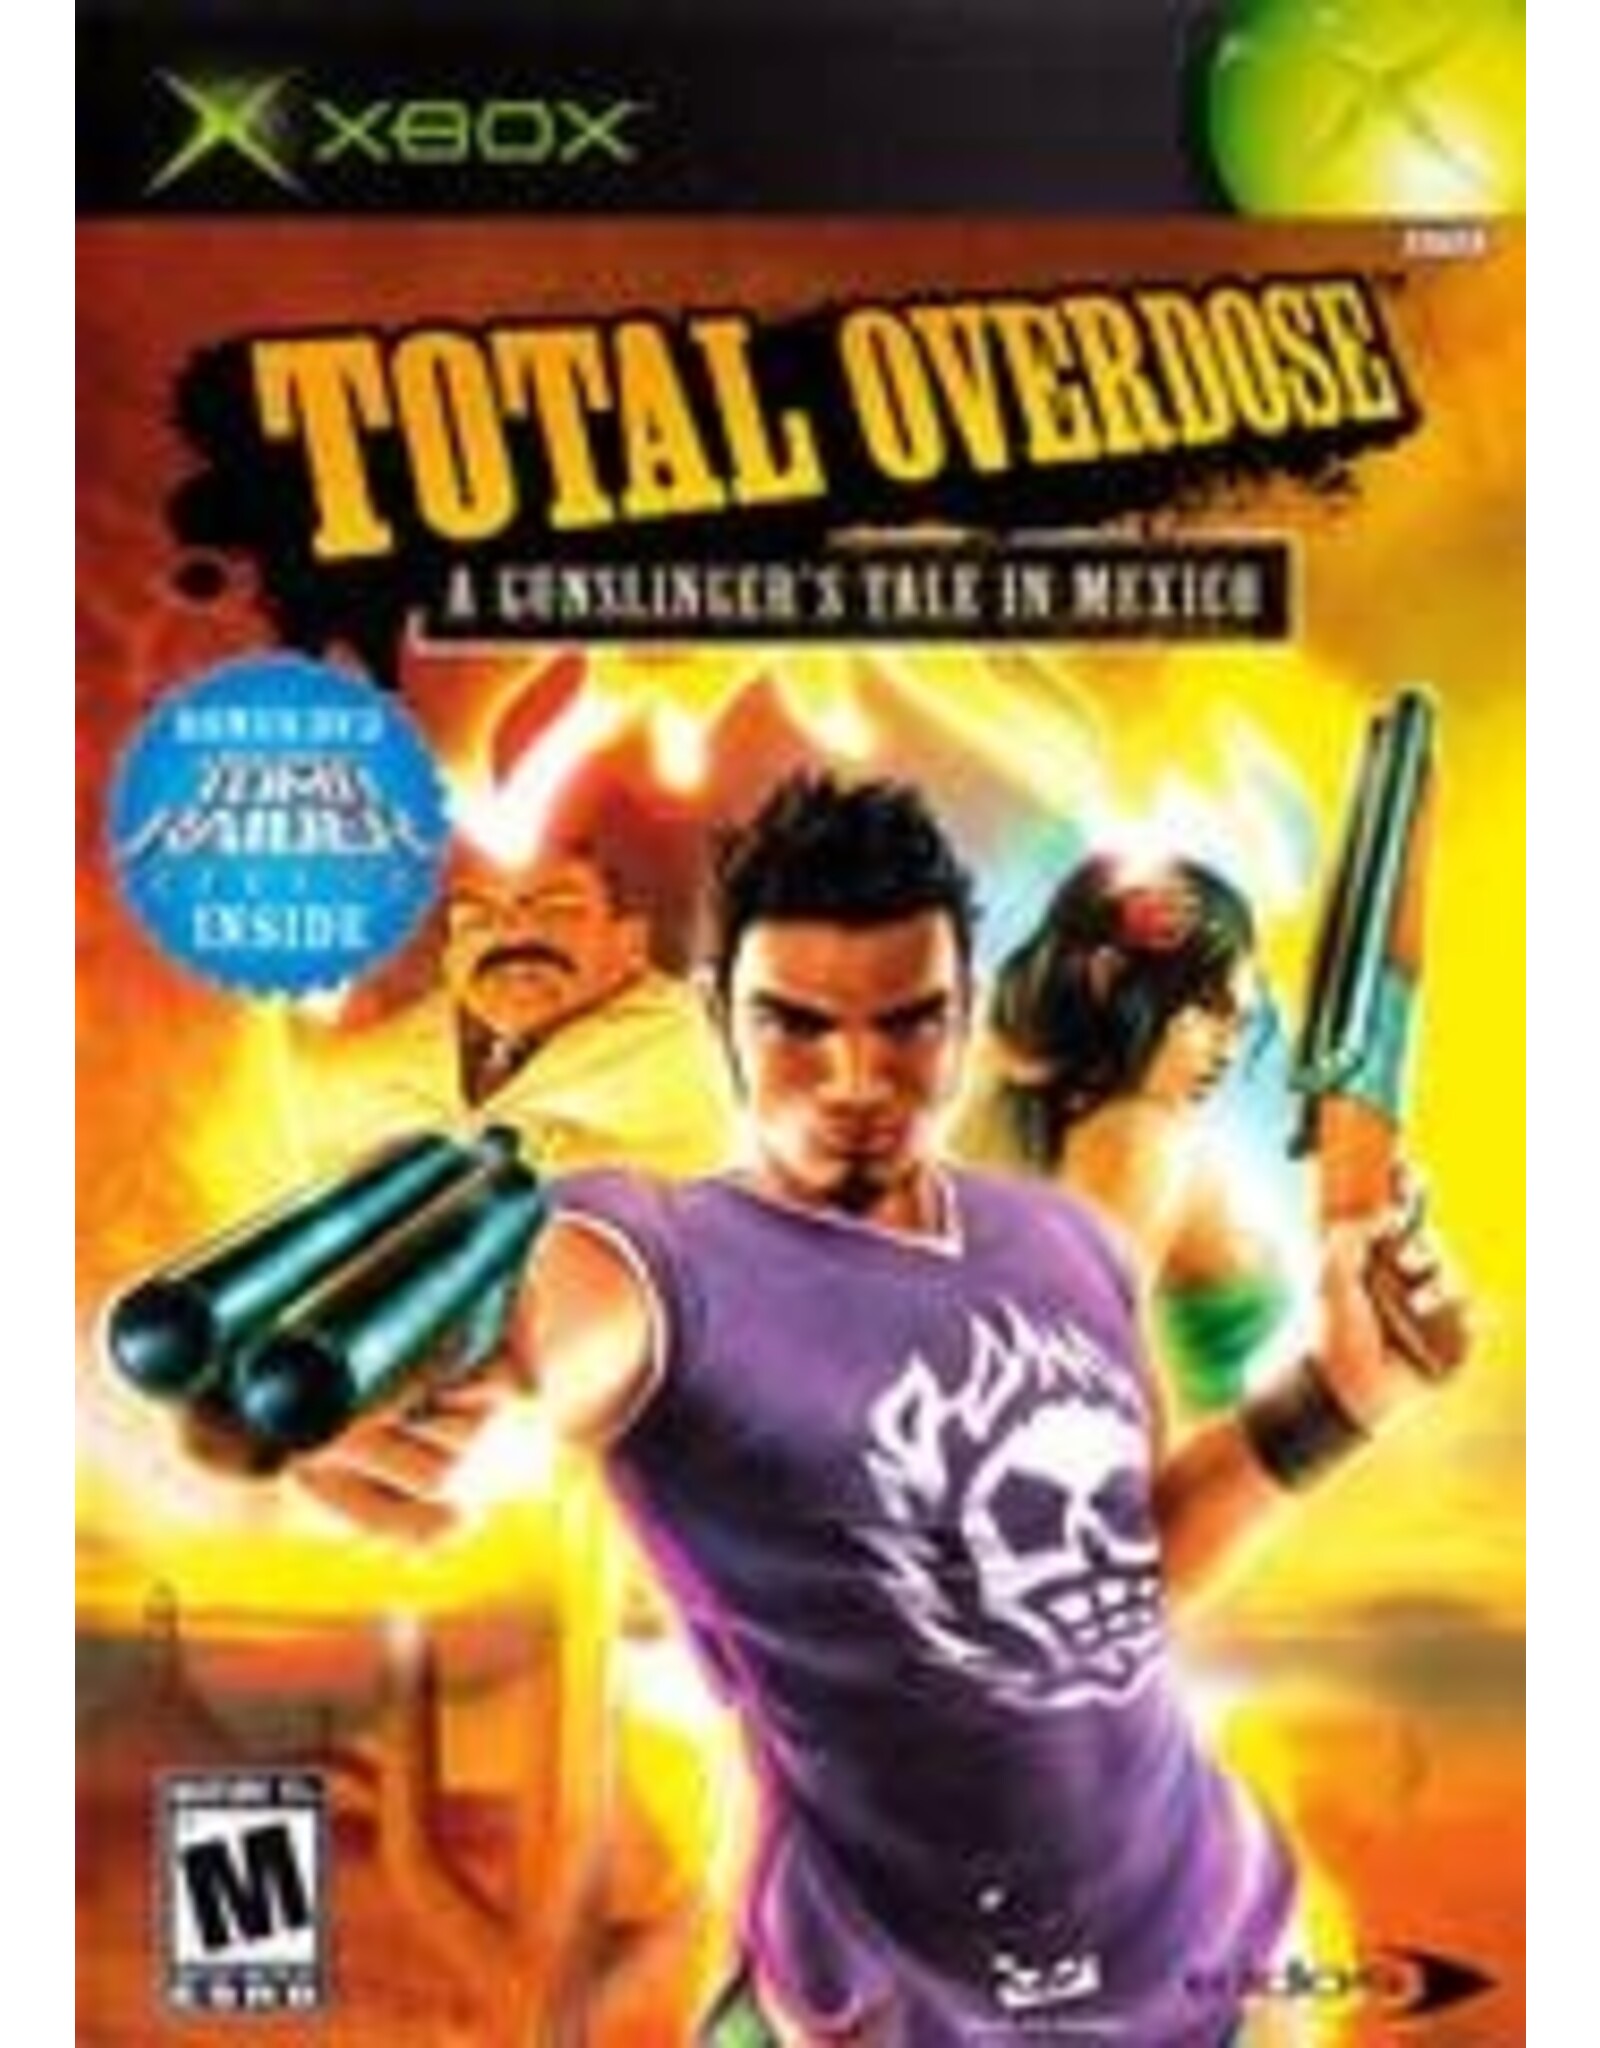 Xbox Total Overdose A Gunslinger's Tale in Mexico (No Manual)